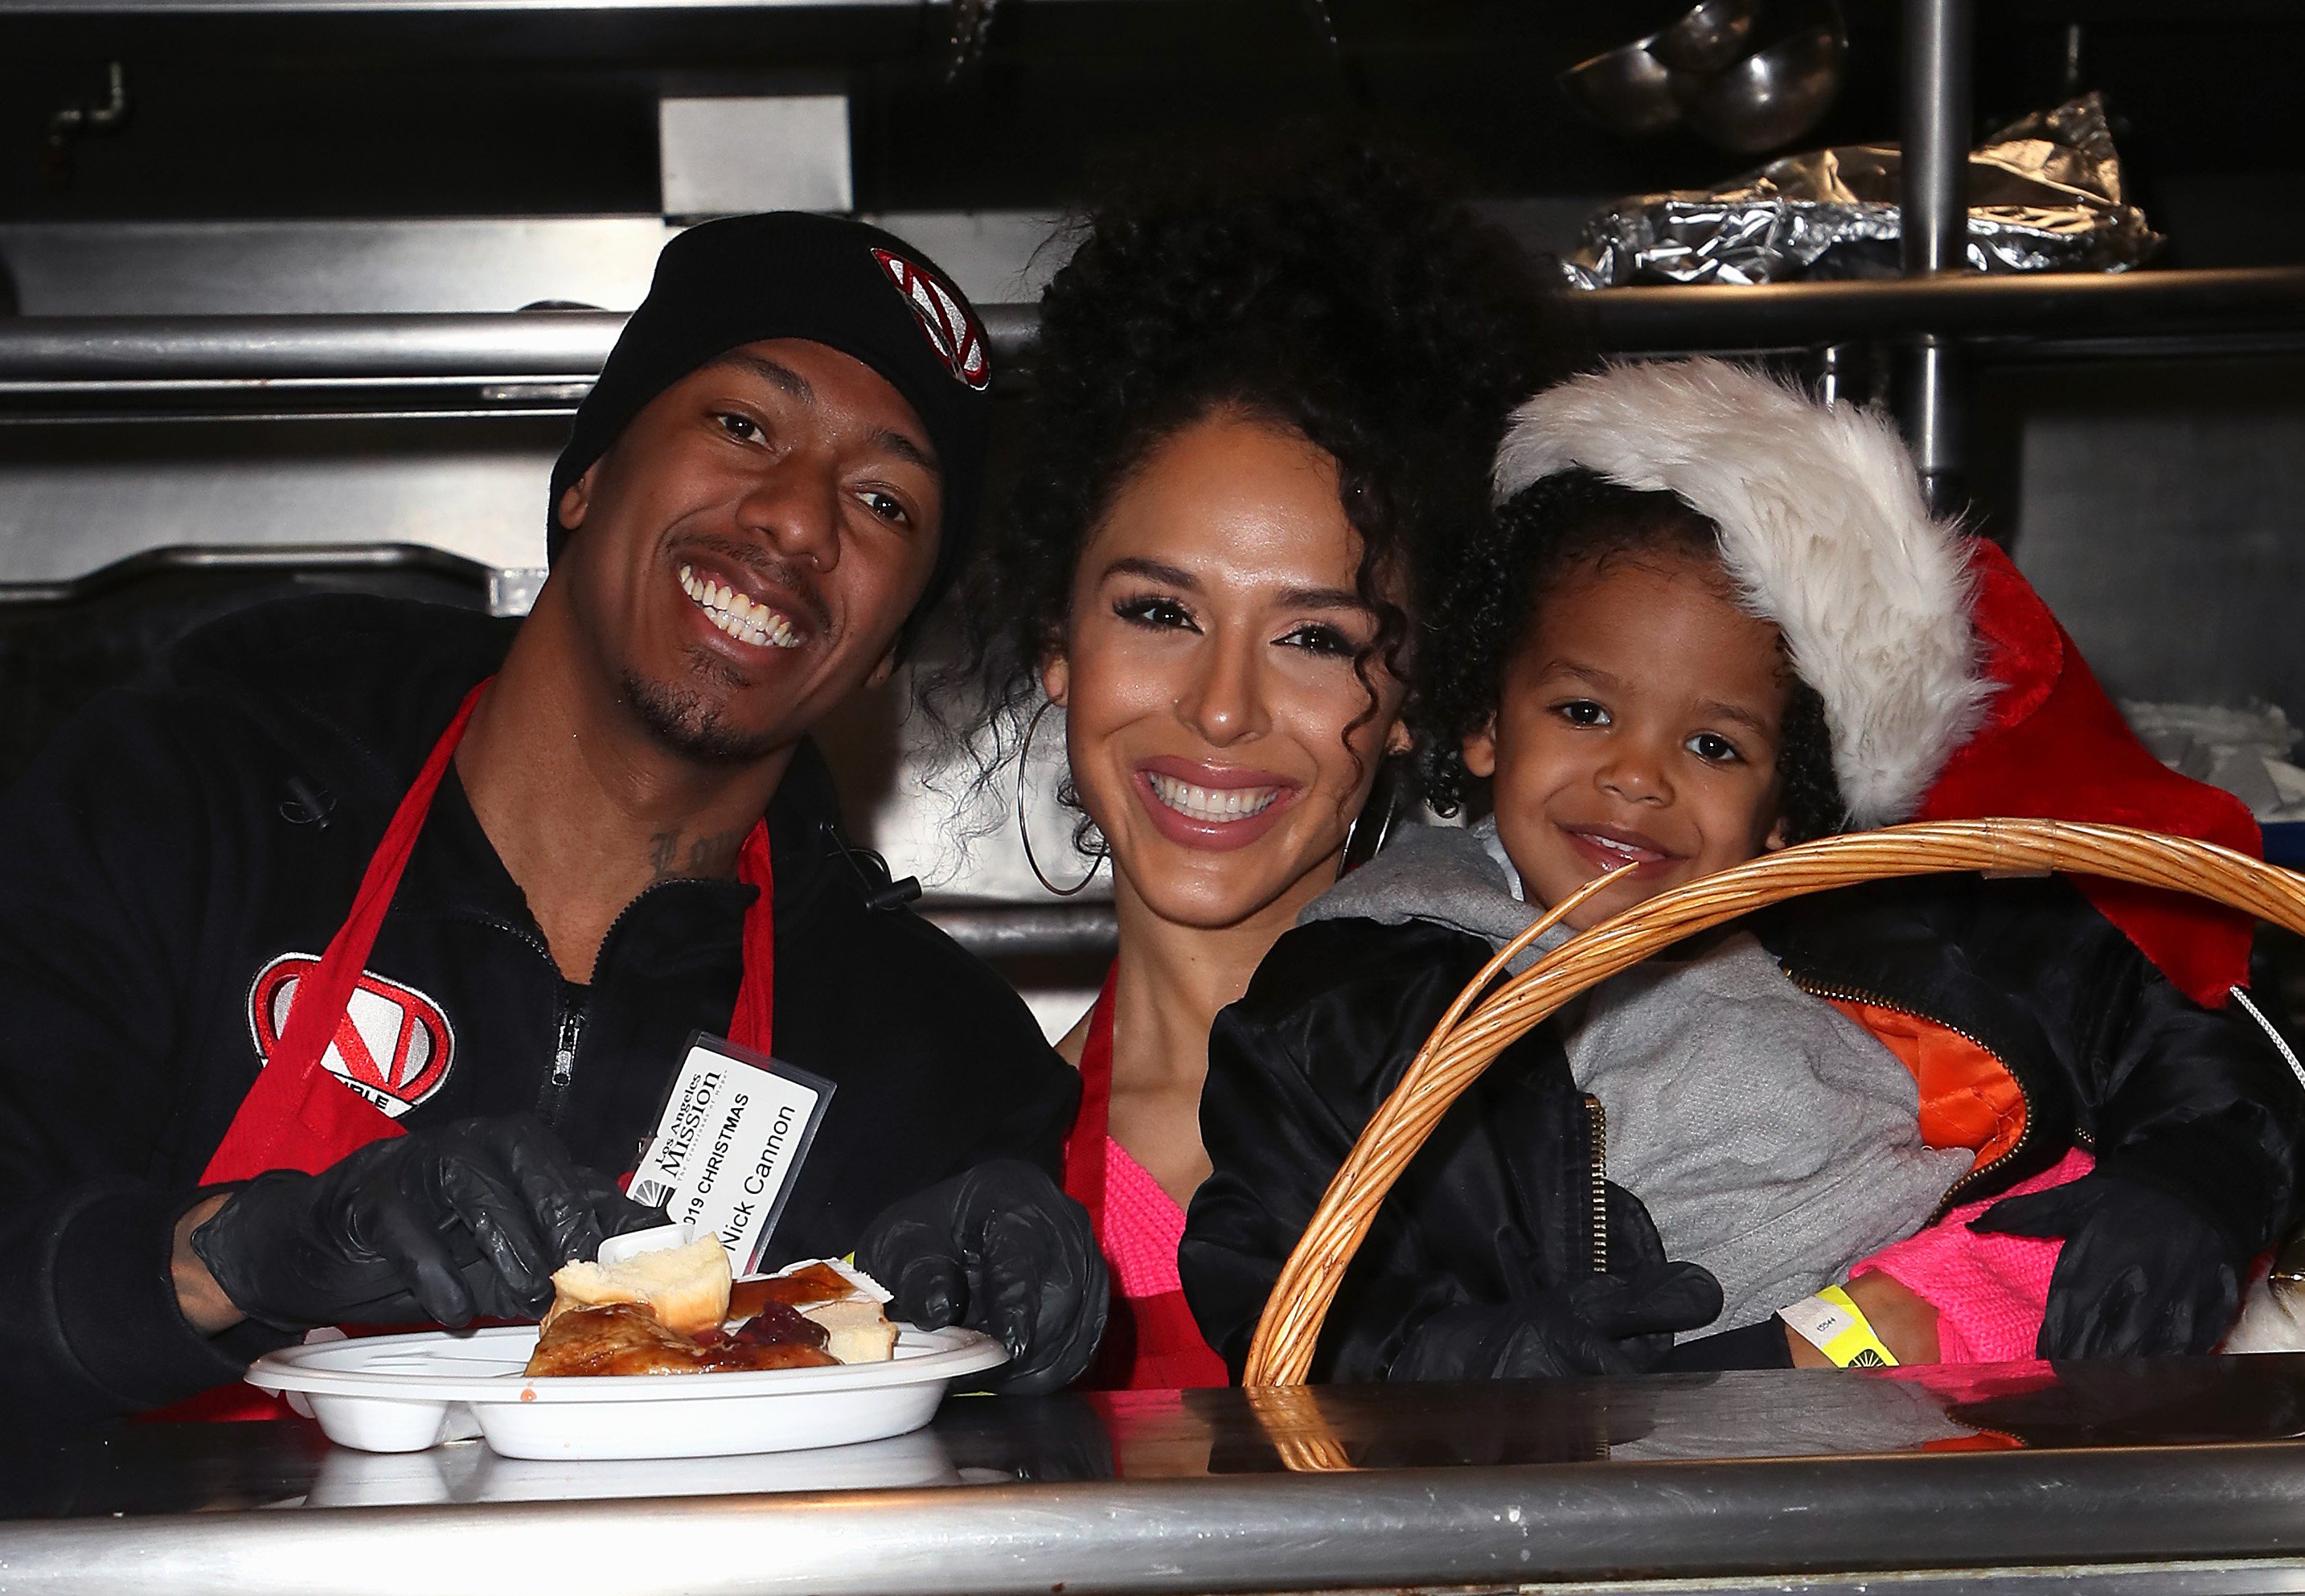 Nick Cannon, Brittany Bell, and their son Golden Cannon smiling for family photo at Christmas event for Los Angeles Mission